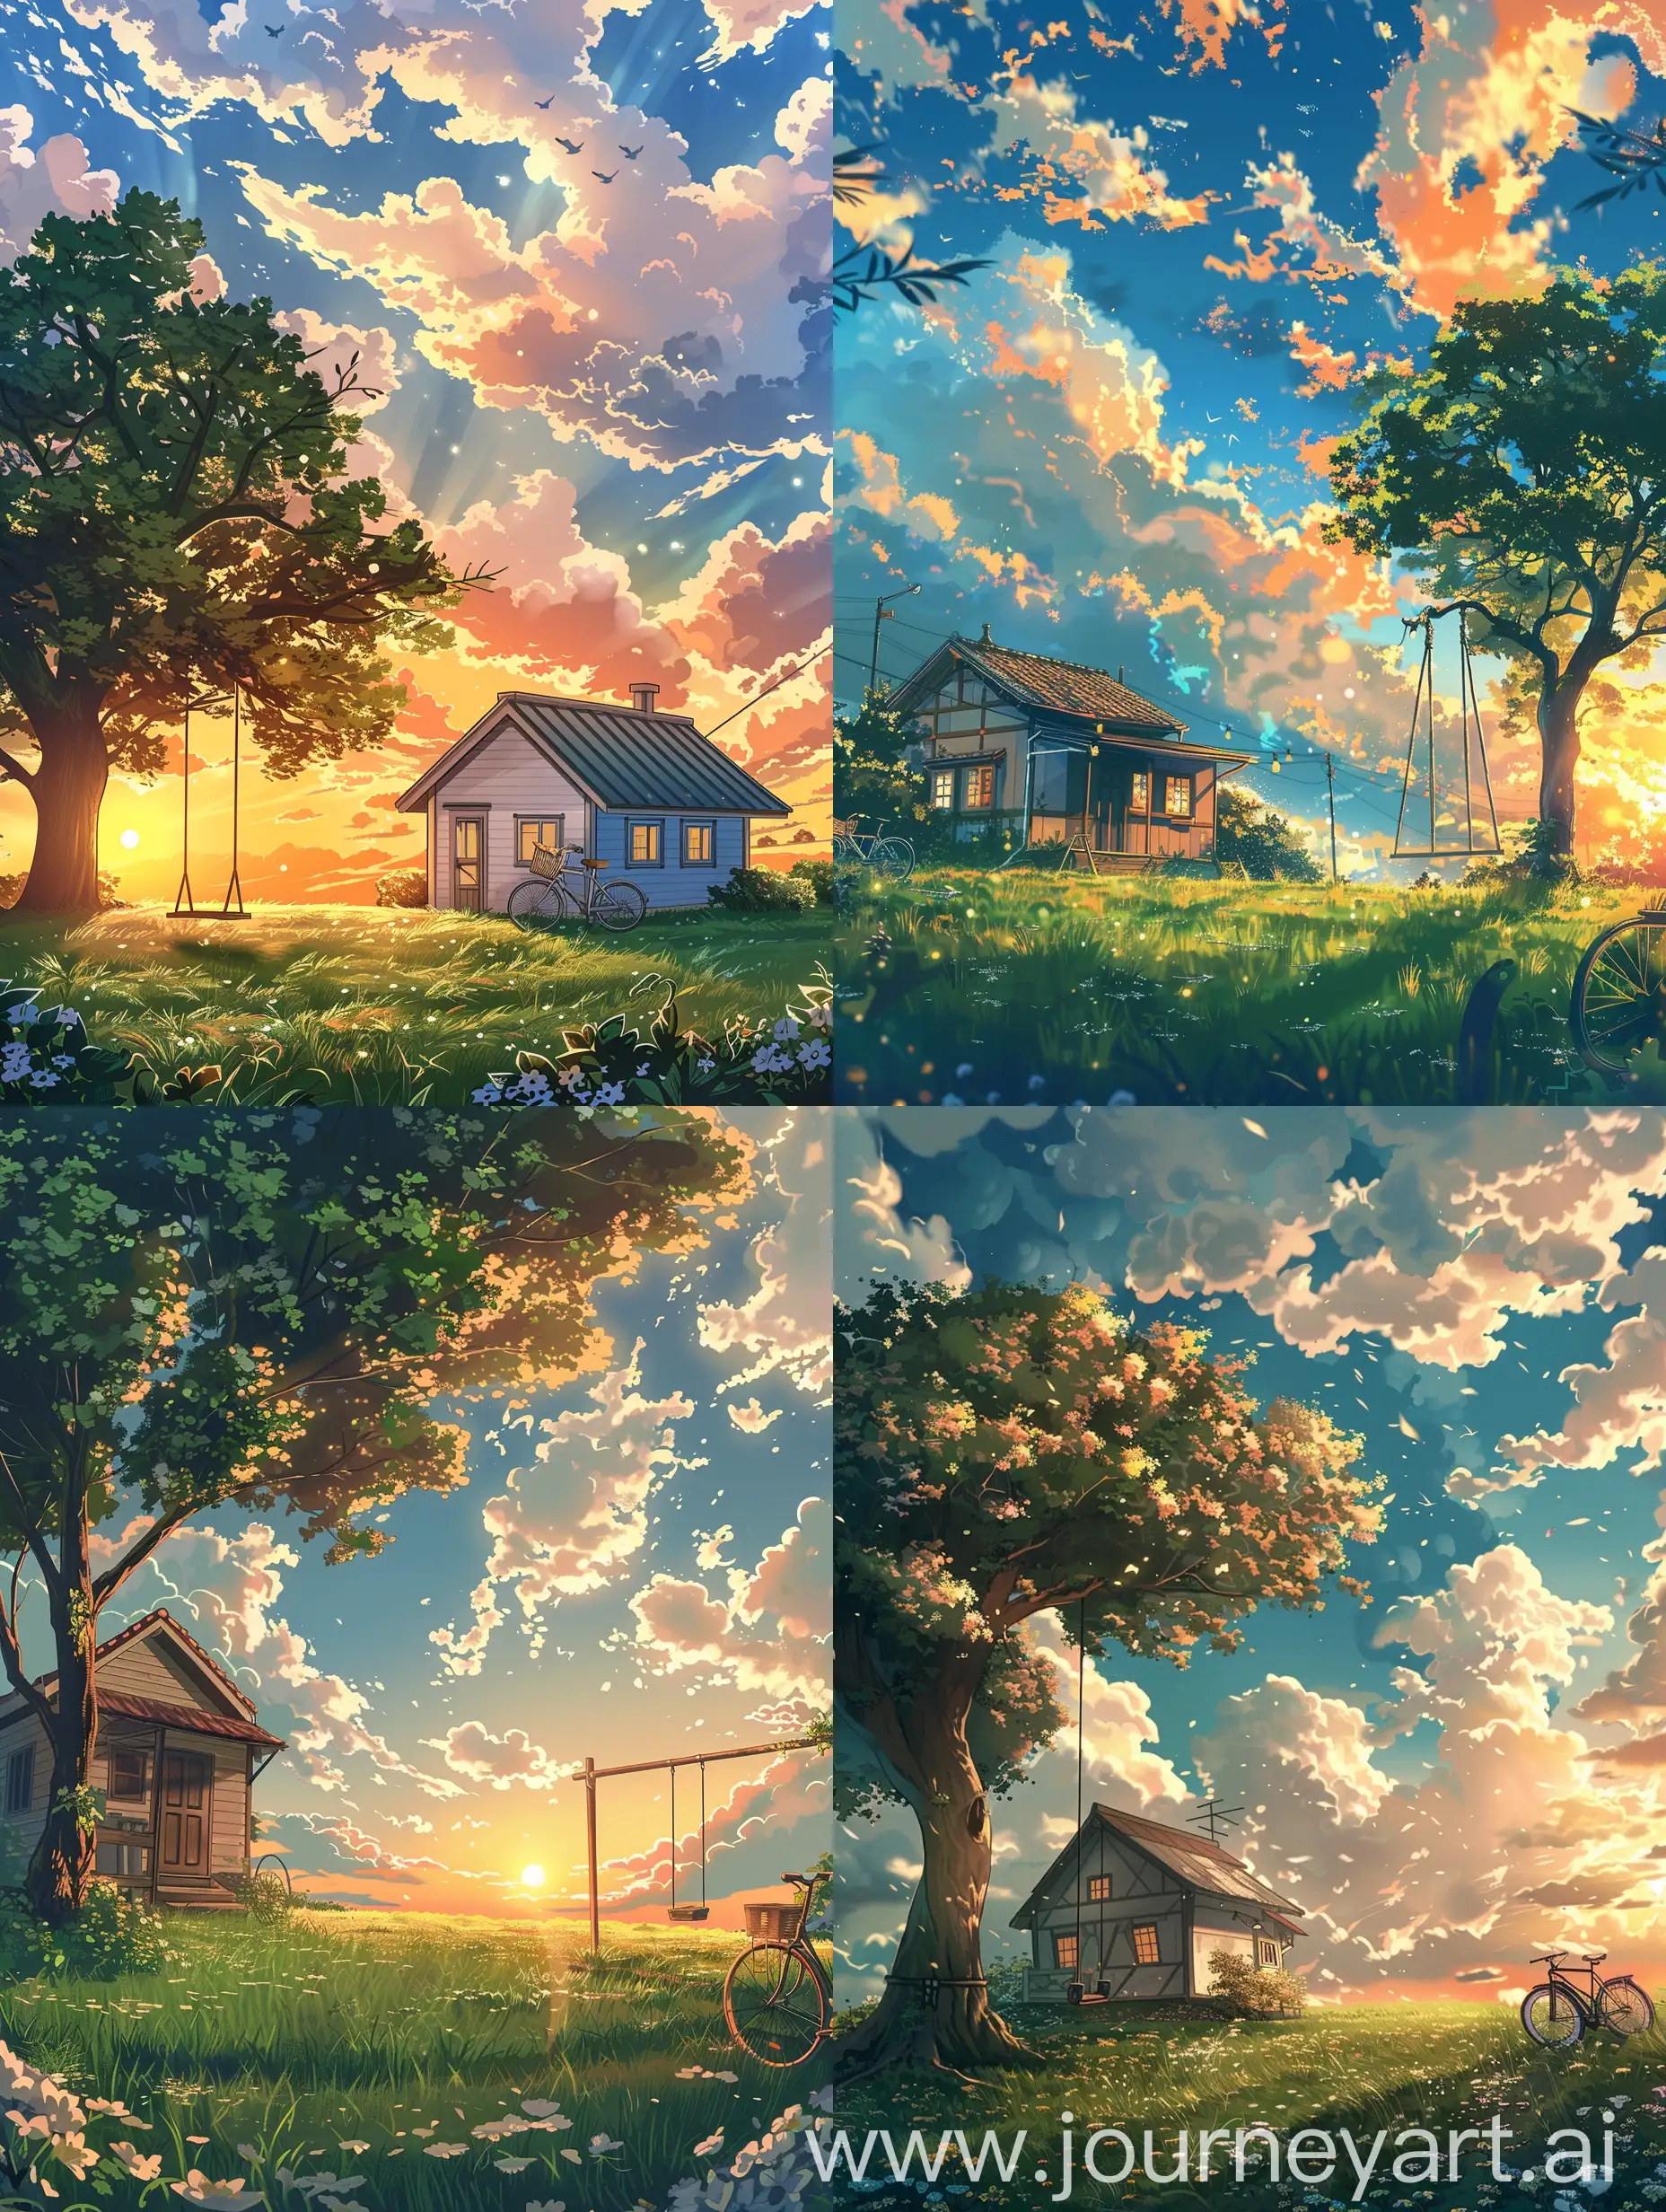 An anime cottage is situated in Grass field and a swing on a tree with white clouds and sunset and a bicycle beside the anime cottage 